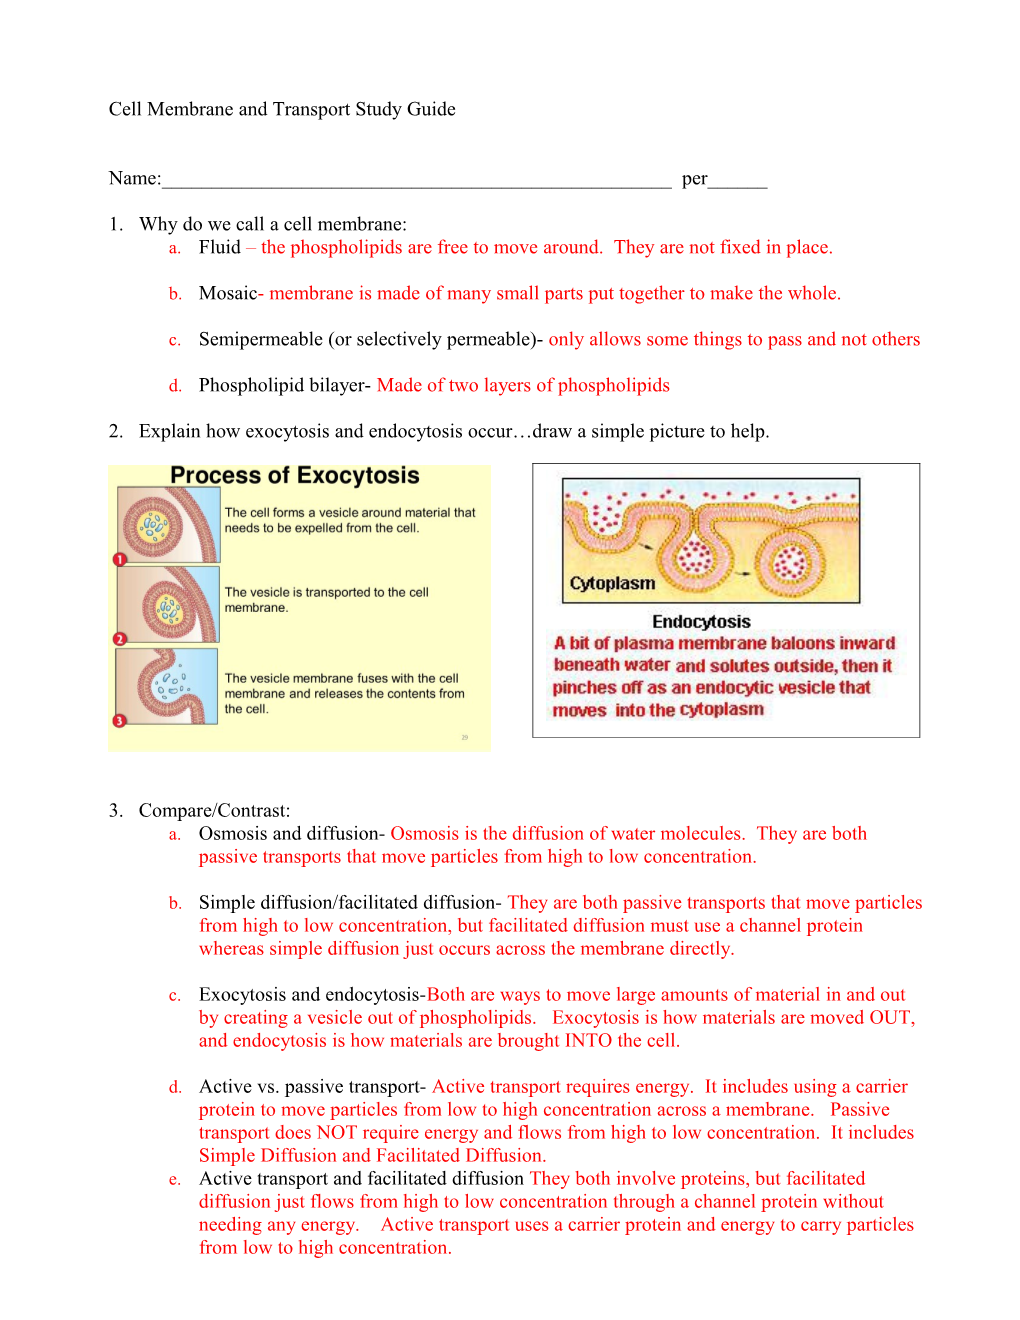 Cell Membrane and Transport Study Guide